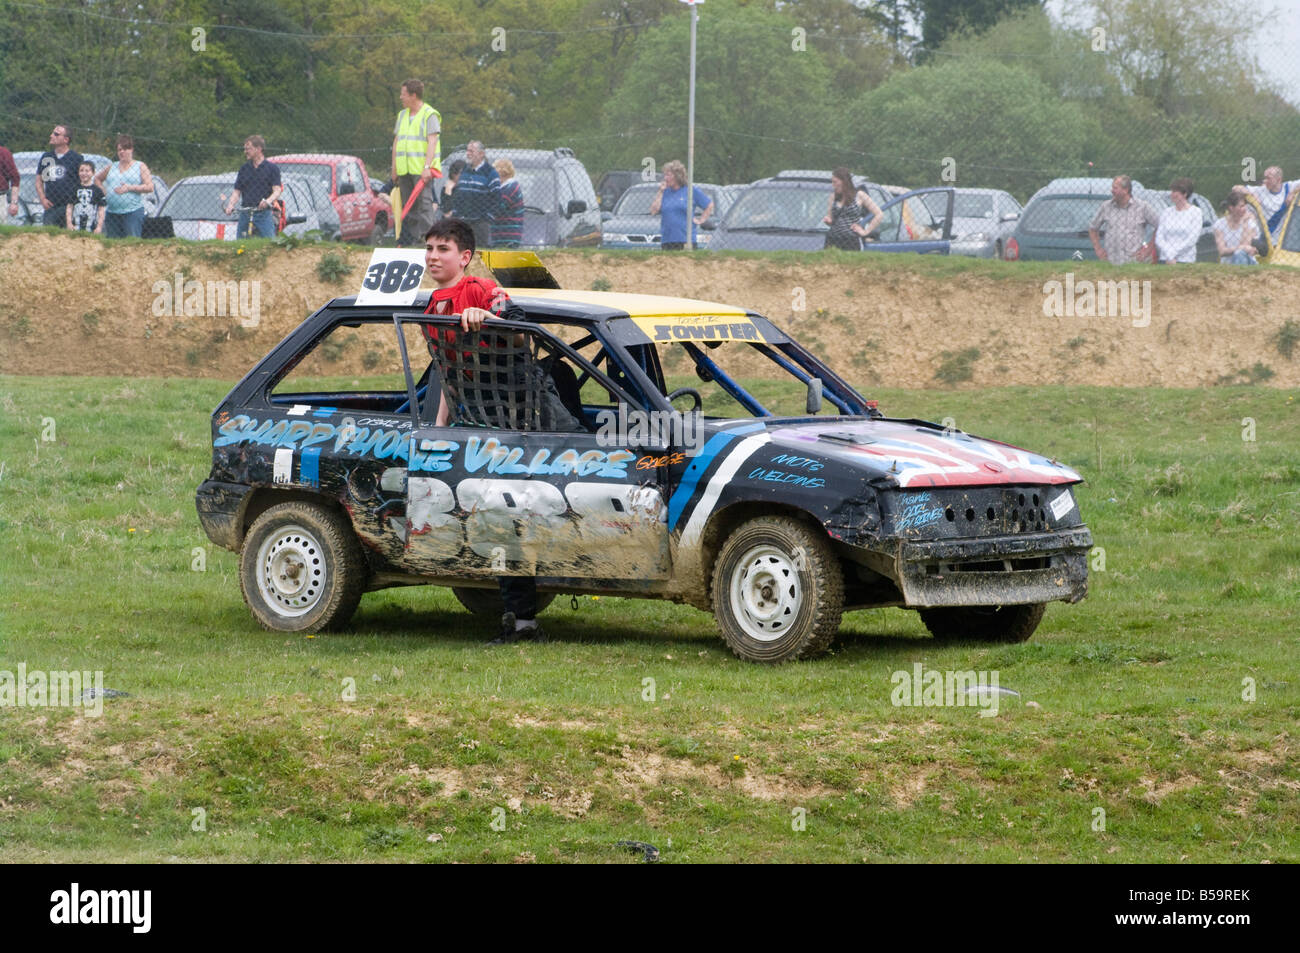 Driver getting out of Banger Racing Car Smallfield Raceway Surrey Damaged Dented Cars Stock Photo